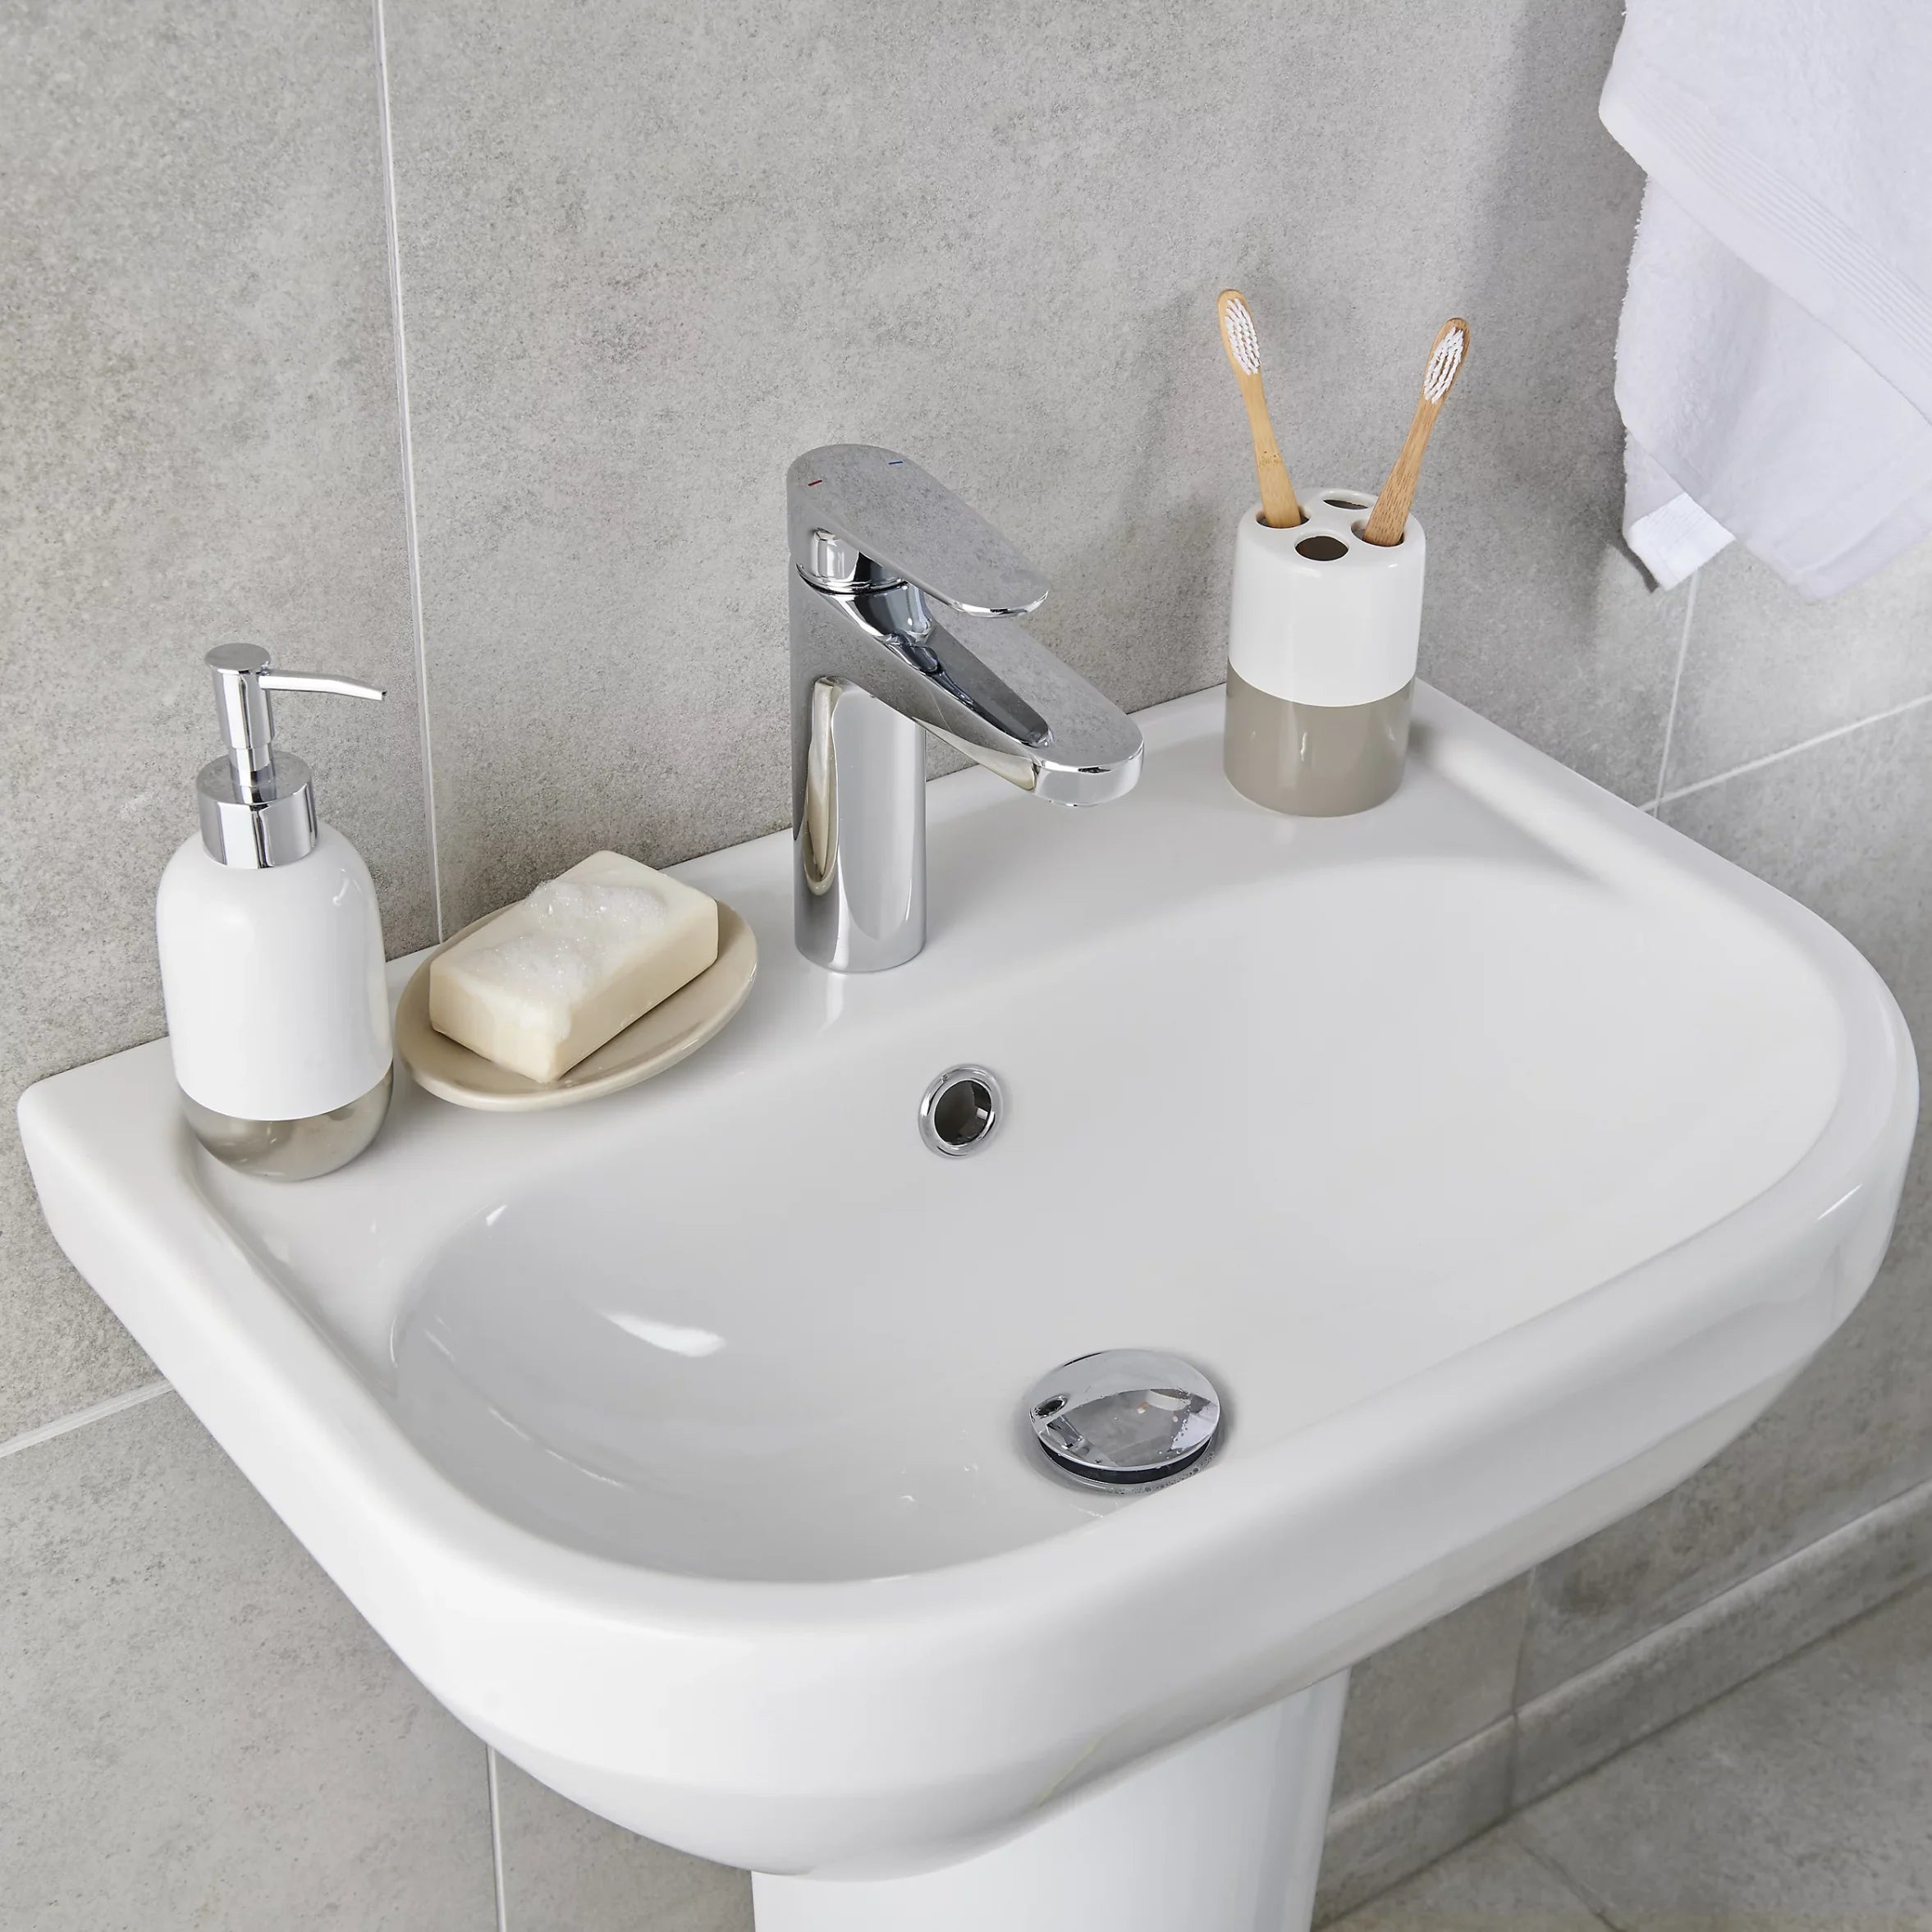 GoodHome Cavally 1 lever Tall Modern Basin Mono mixer Tap 1721